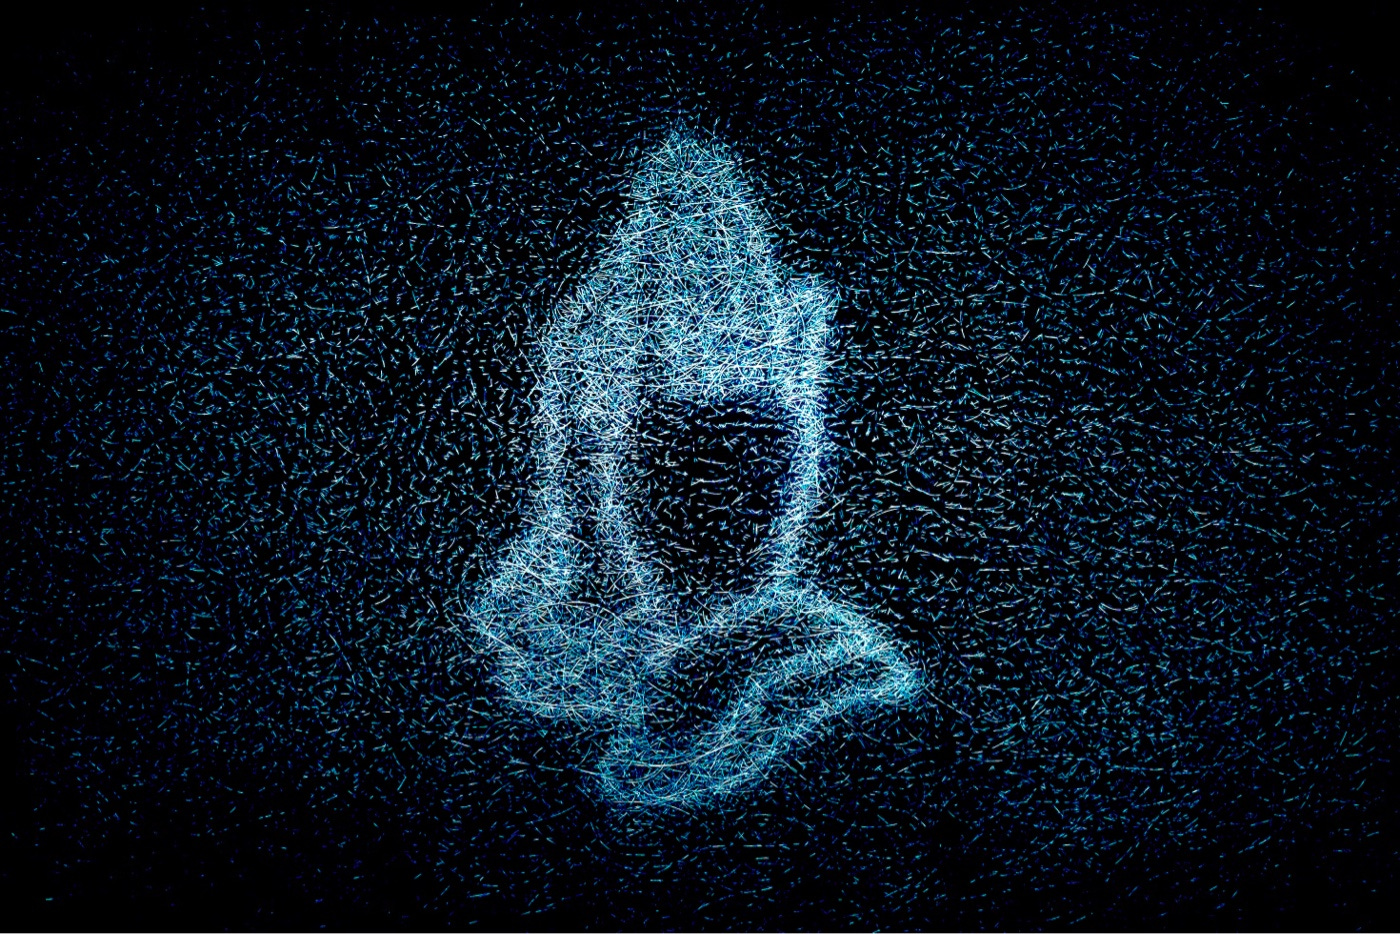 A blue neon sign of a pair of praying hands, on a black background, seen through a frosted window.